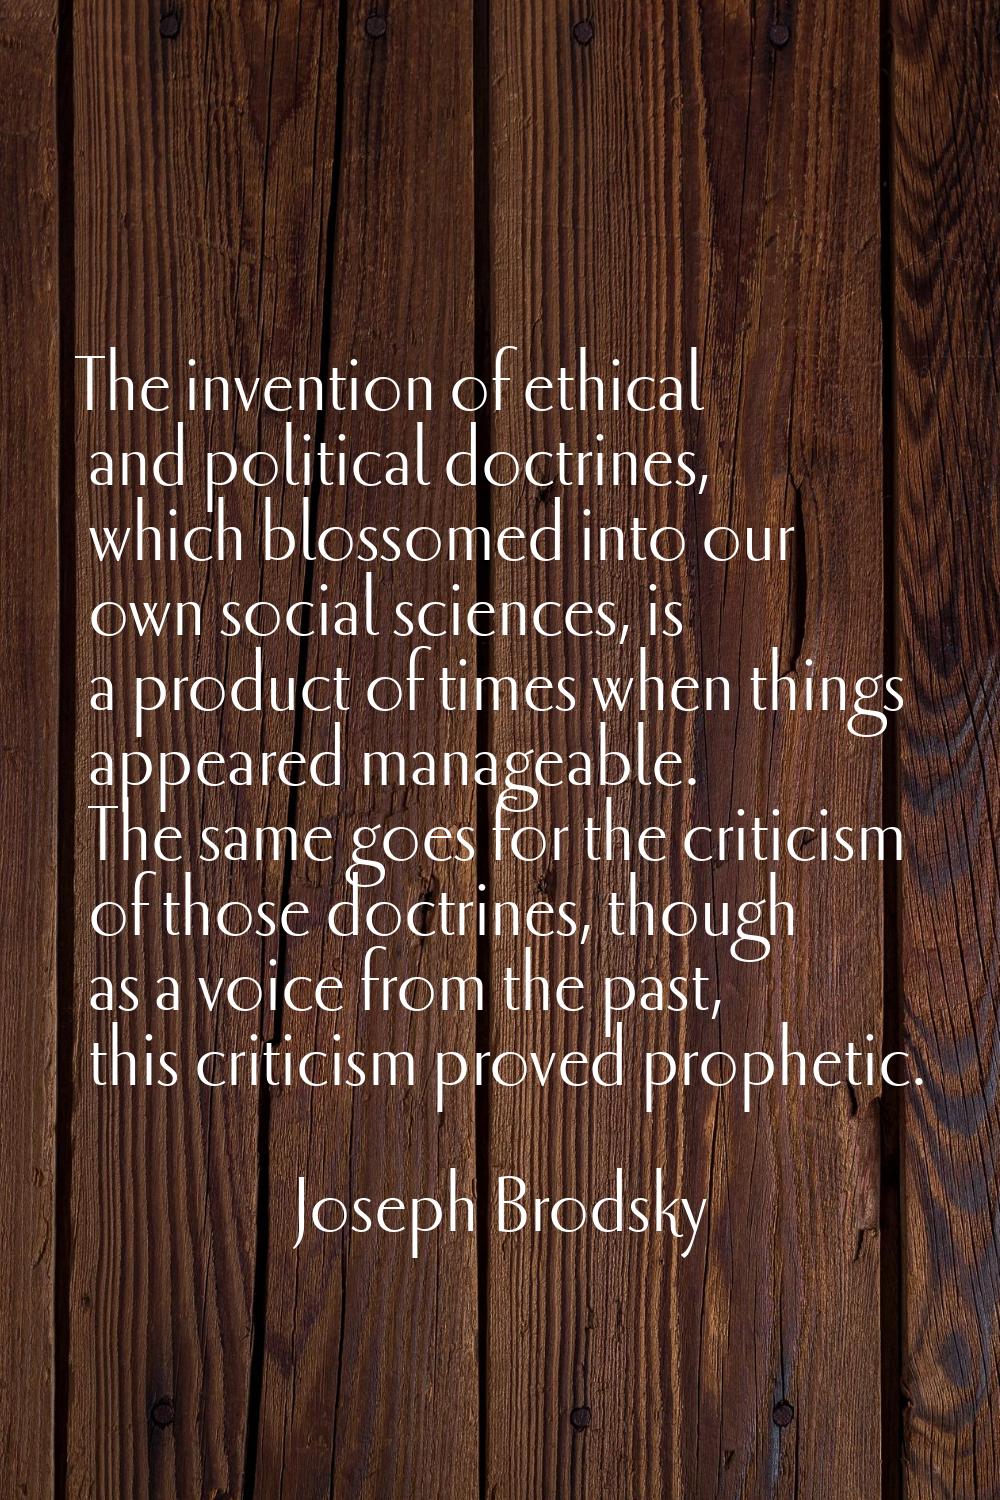 The invention of ethical and political doctrines, which blossomed into our own social sciences, is 